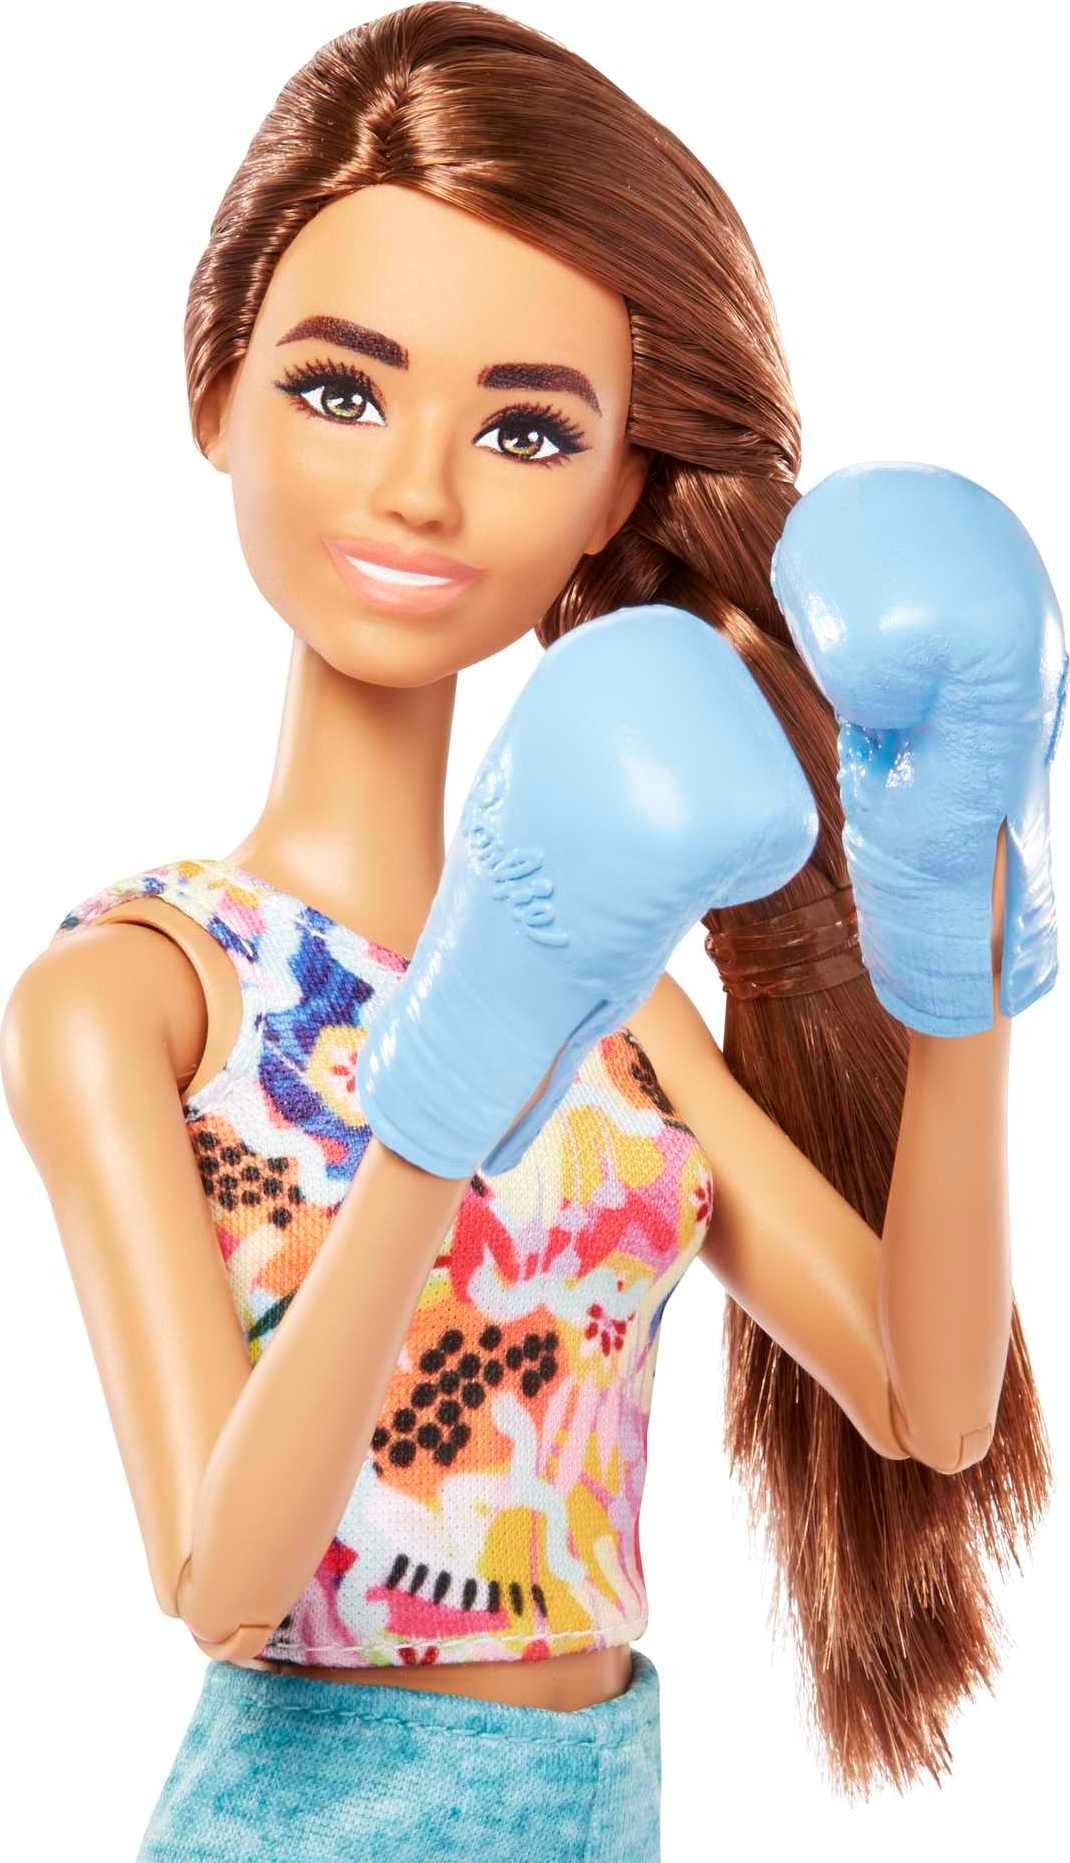 Barbie Self-Care Doll, Brunette Posable Workout Doll with Puppy and Accessories Including Roller Skates & Tennis Rackets